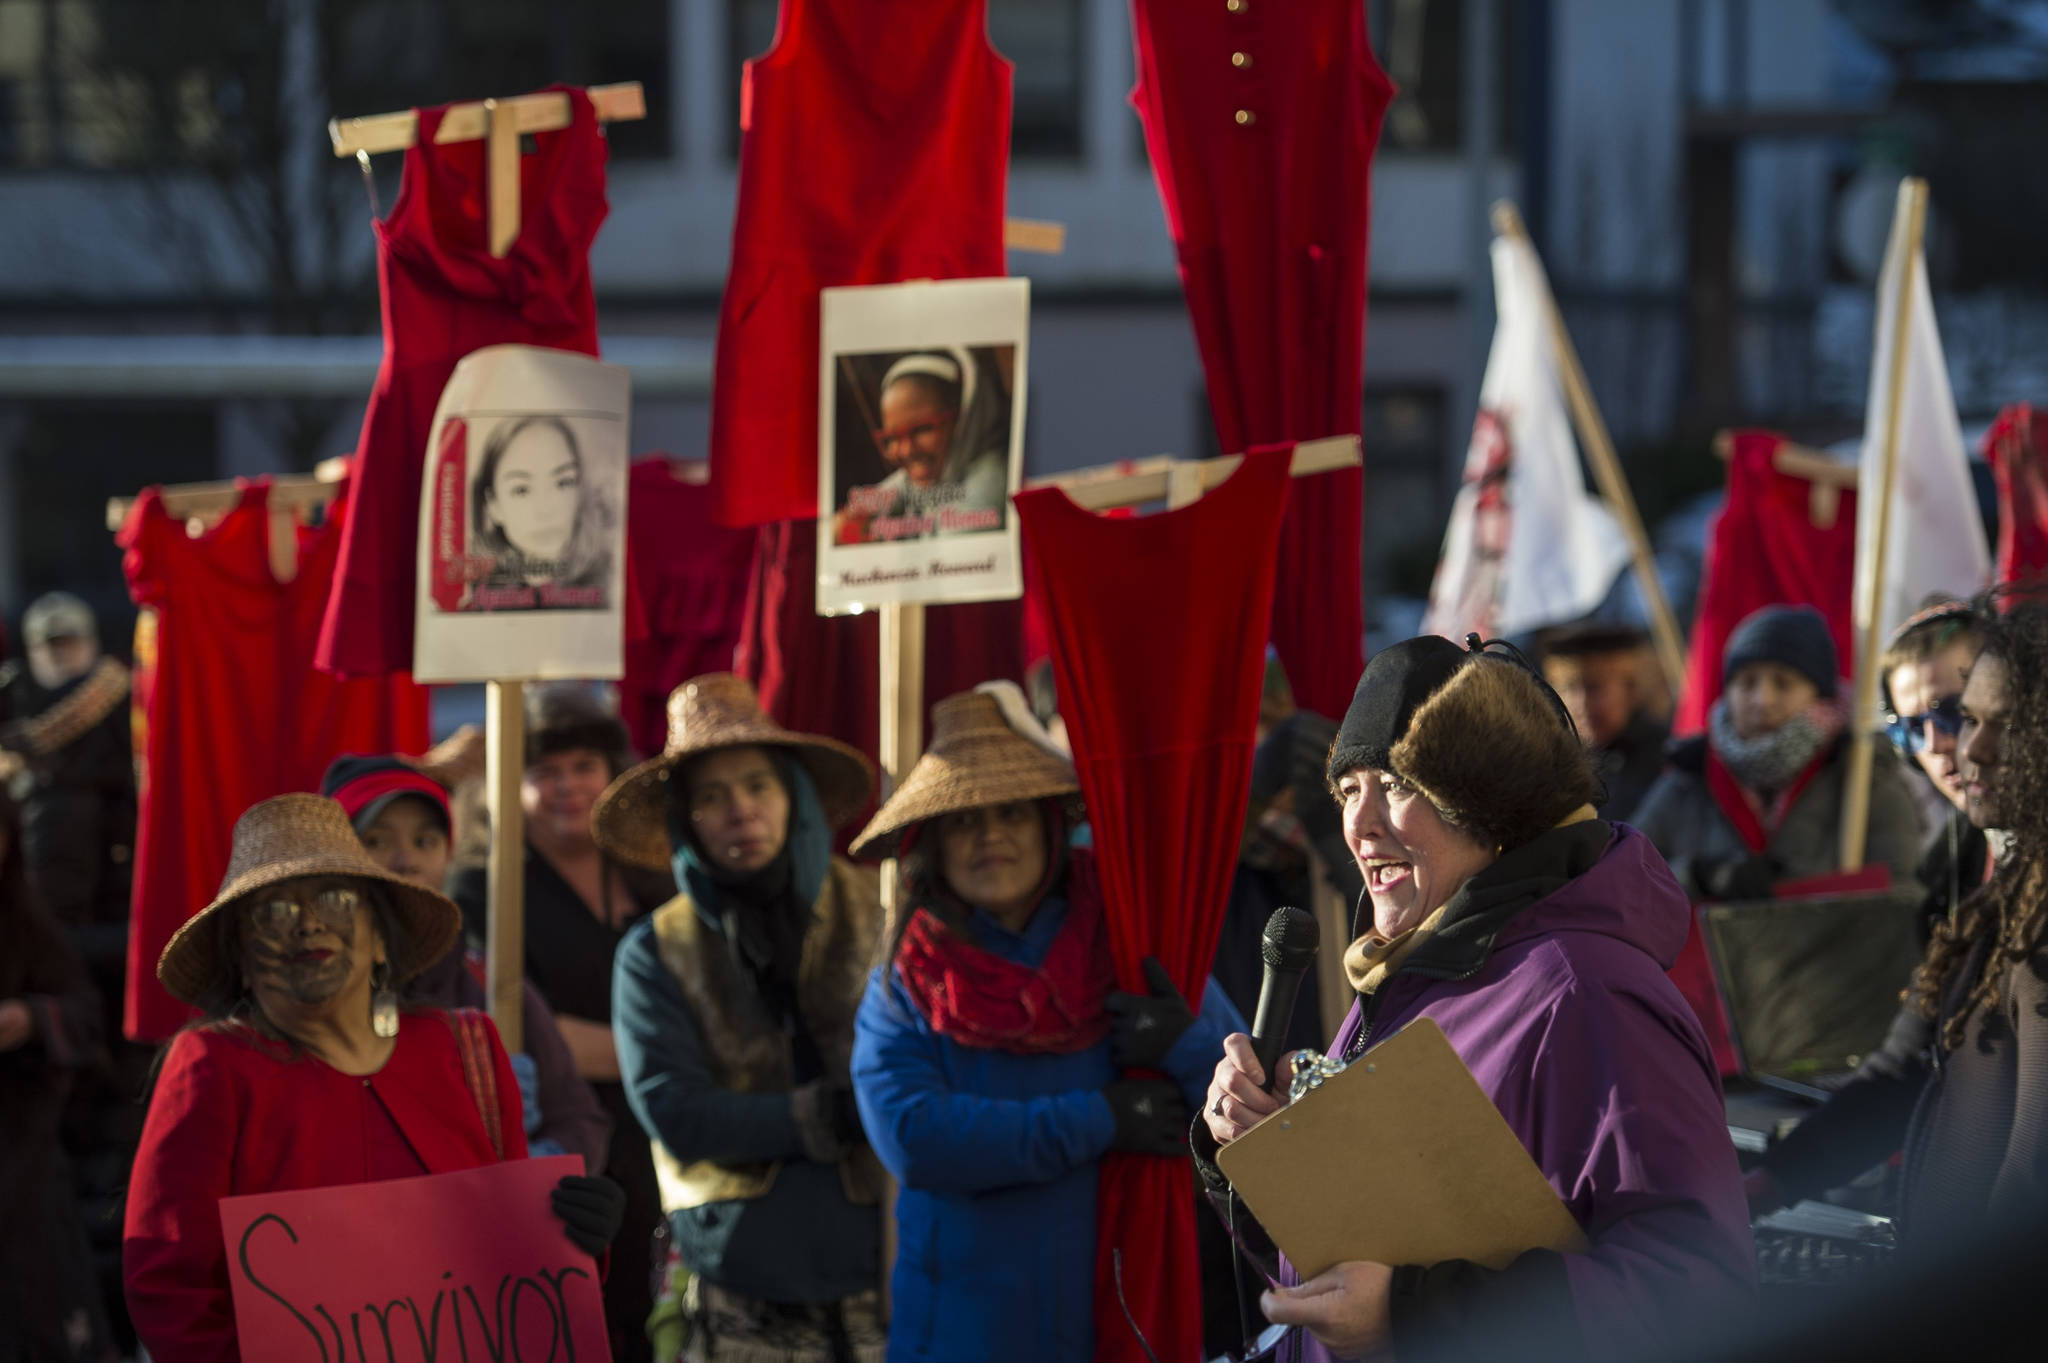 Rep. Sara Hannan speaks as Native women hold up red dresses to symbolizing missing and murdered indigenous women during the Women’s March on Juneau in front of the Alaska State Capitol on Saturday, Jan. 19, 2019. (Michael Penn | Juneau Empire)